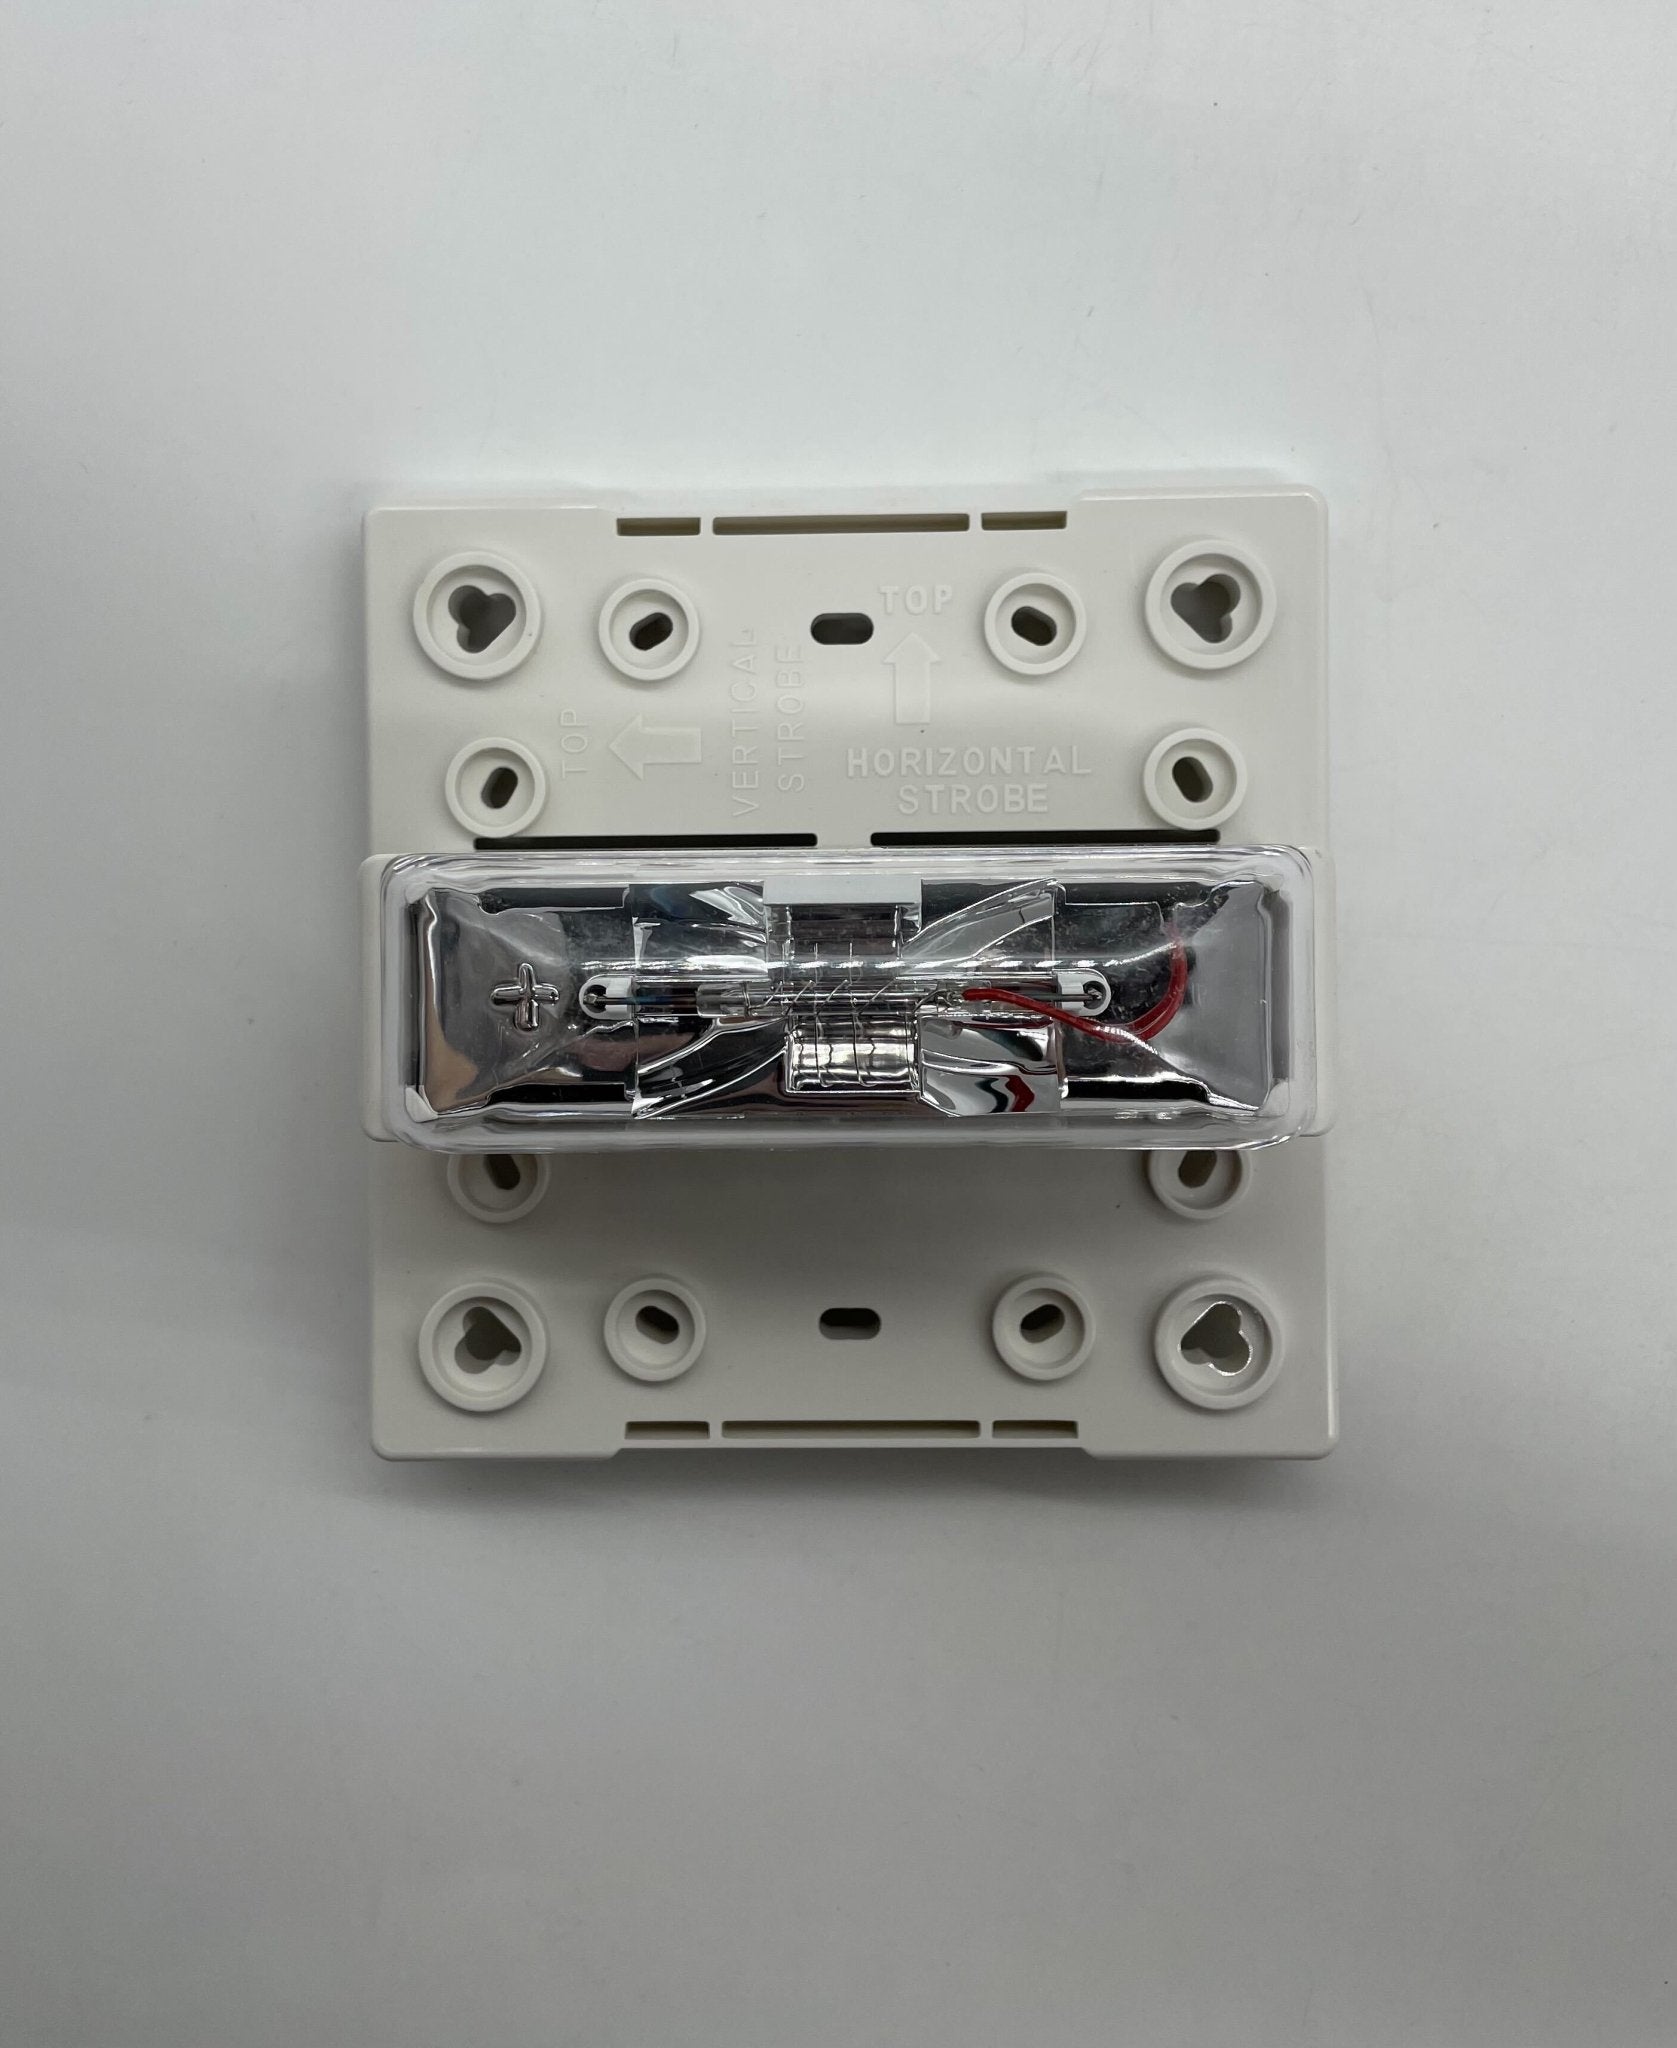 Wheelock RSS-24MCW-FW - The Fire Alarm Supplier